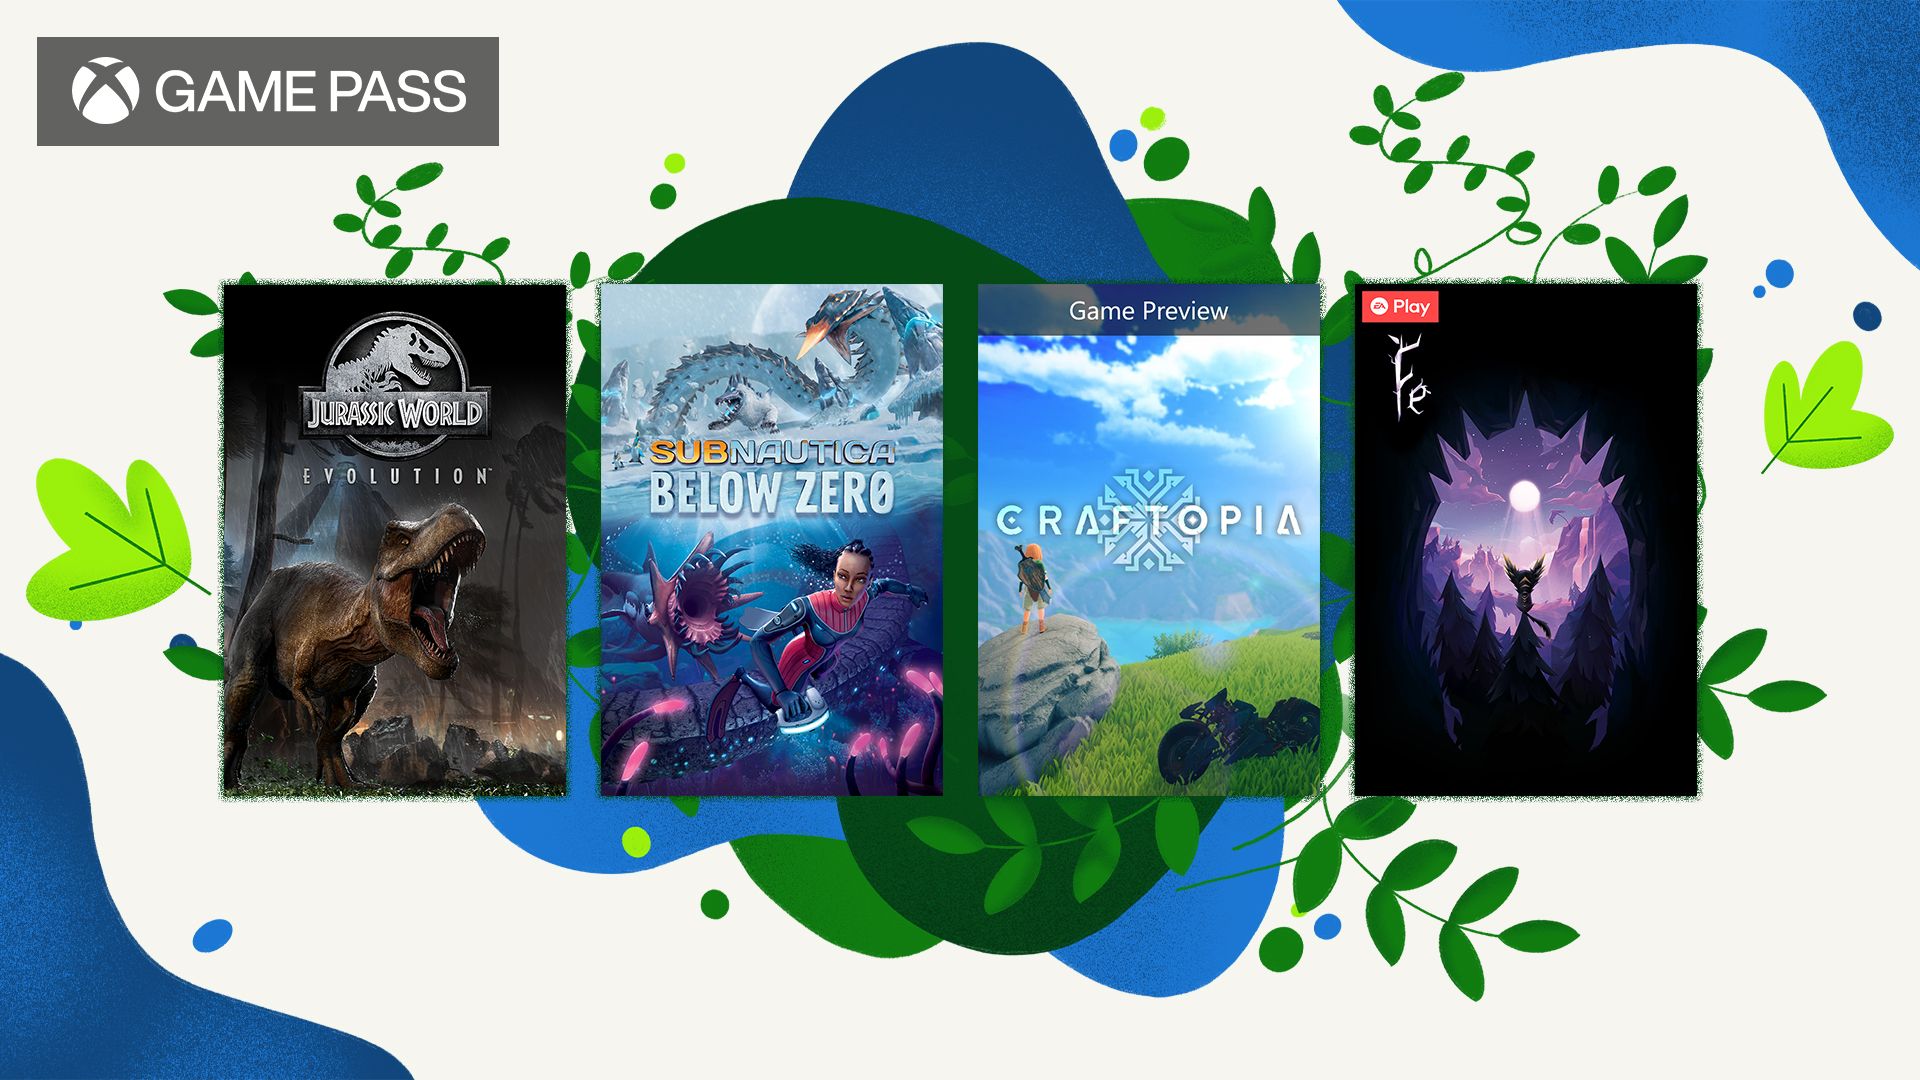 A picture containing four popular video games: Jurassic World Evolution, SubNautica: Below Zero, Craftopia, and Fe. 